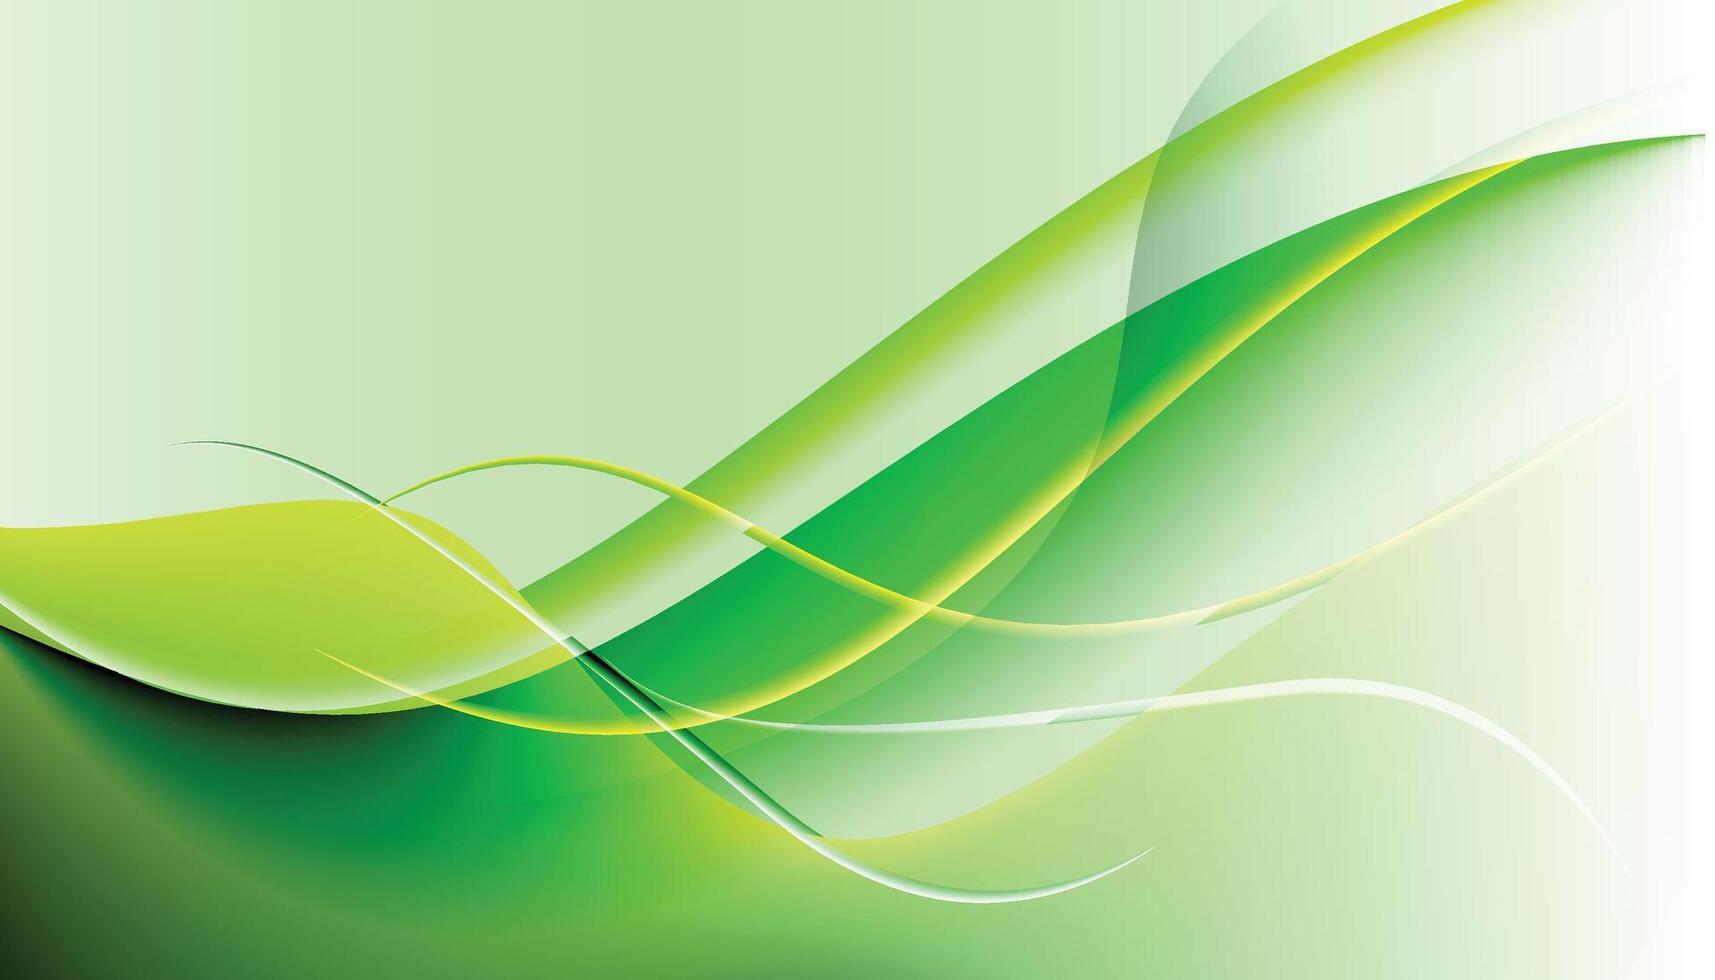 Green Background Photos and hd Wallpaper for Free Download vector